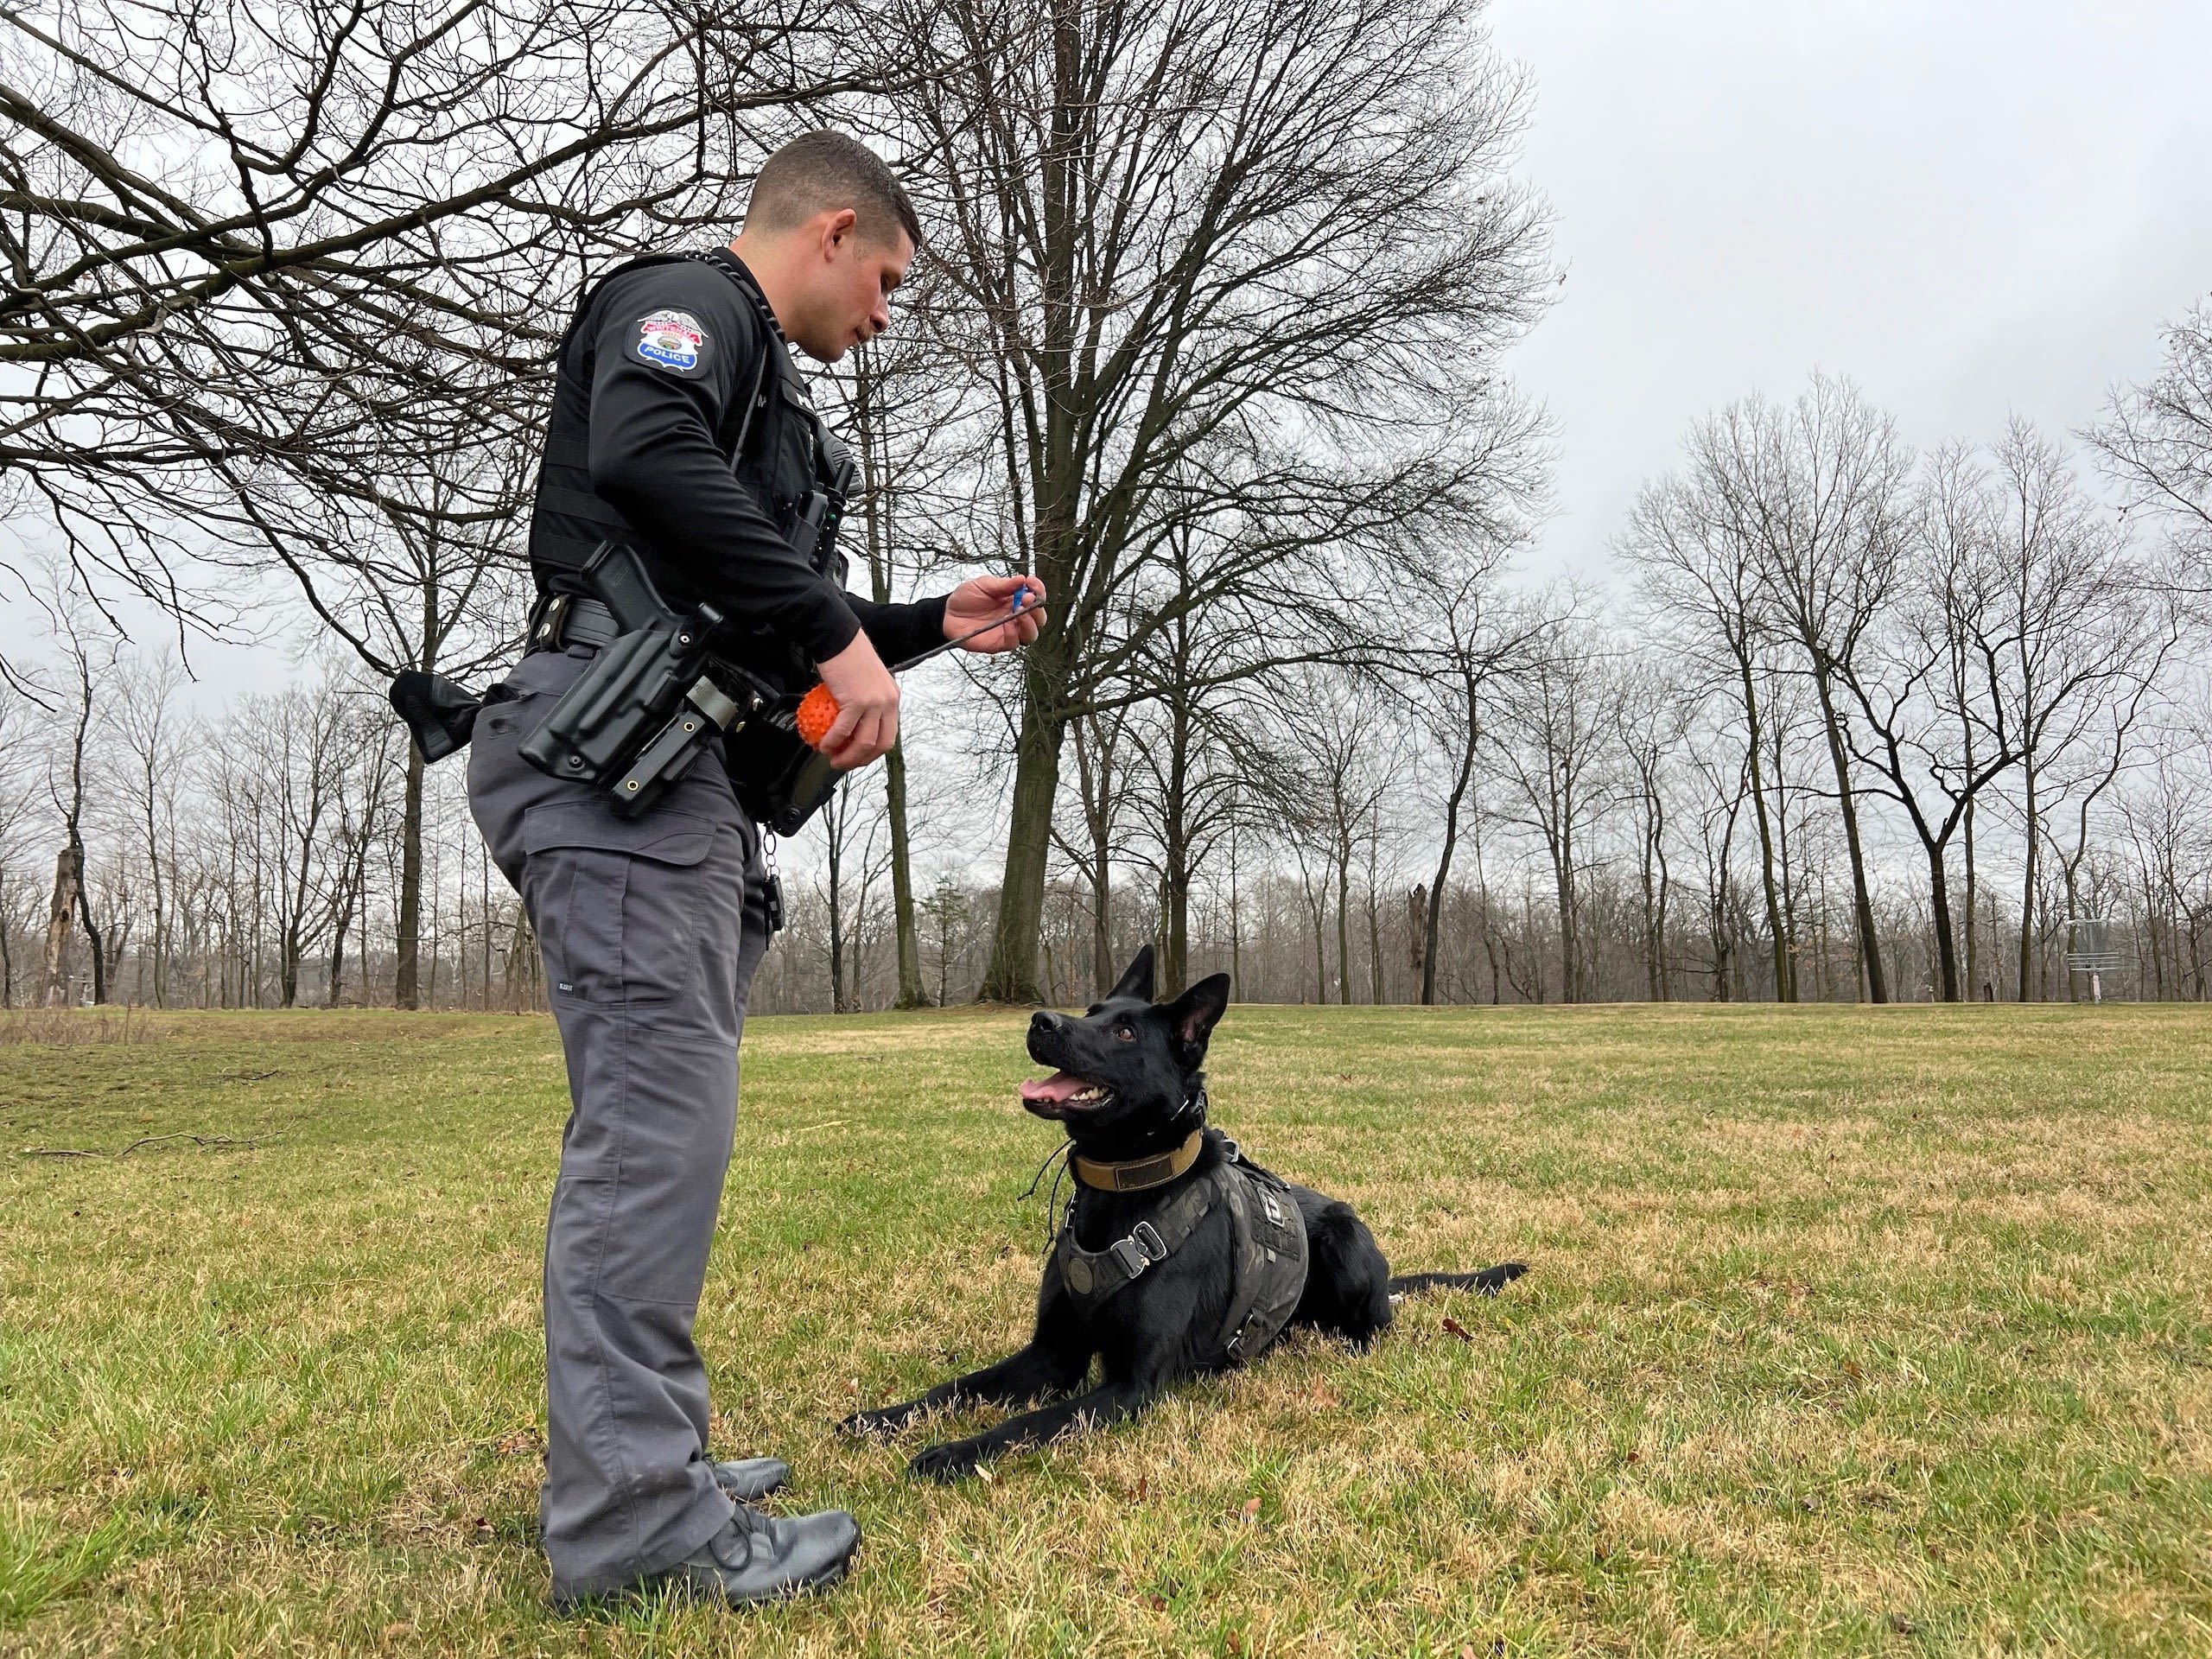 Top Minnesota court nixes sovereign immunity for police dog attacks